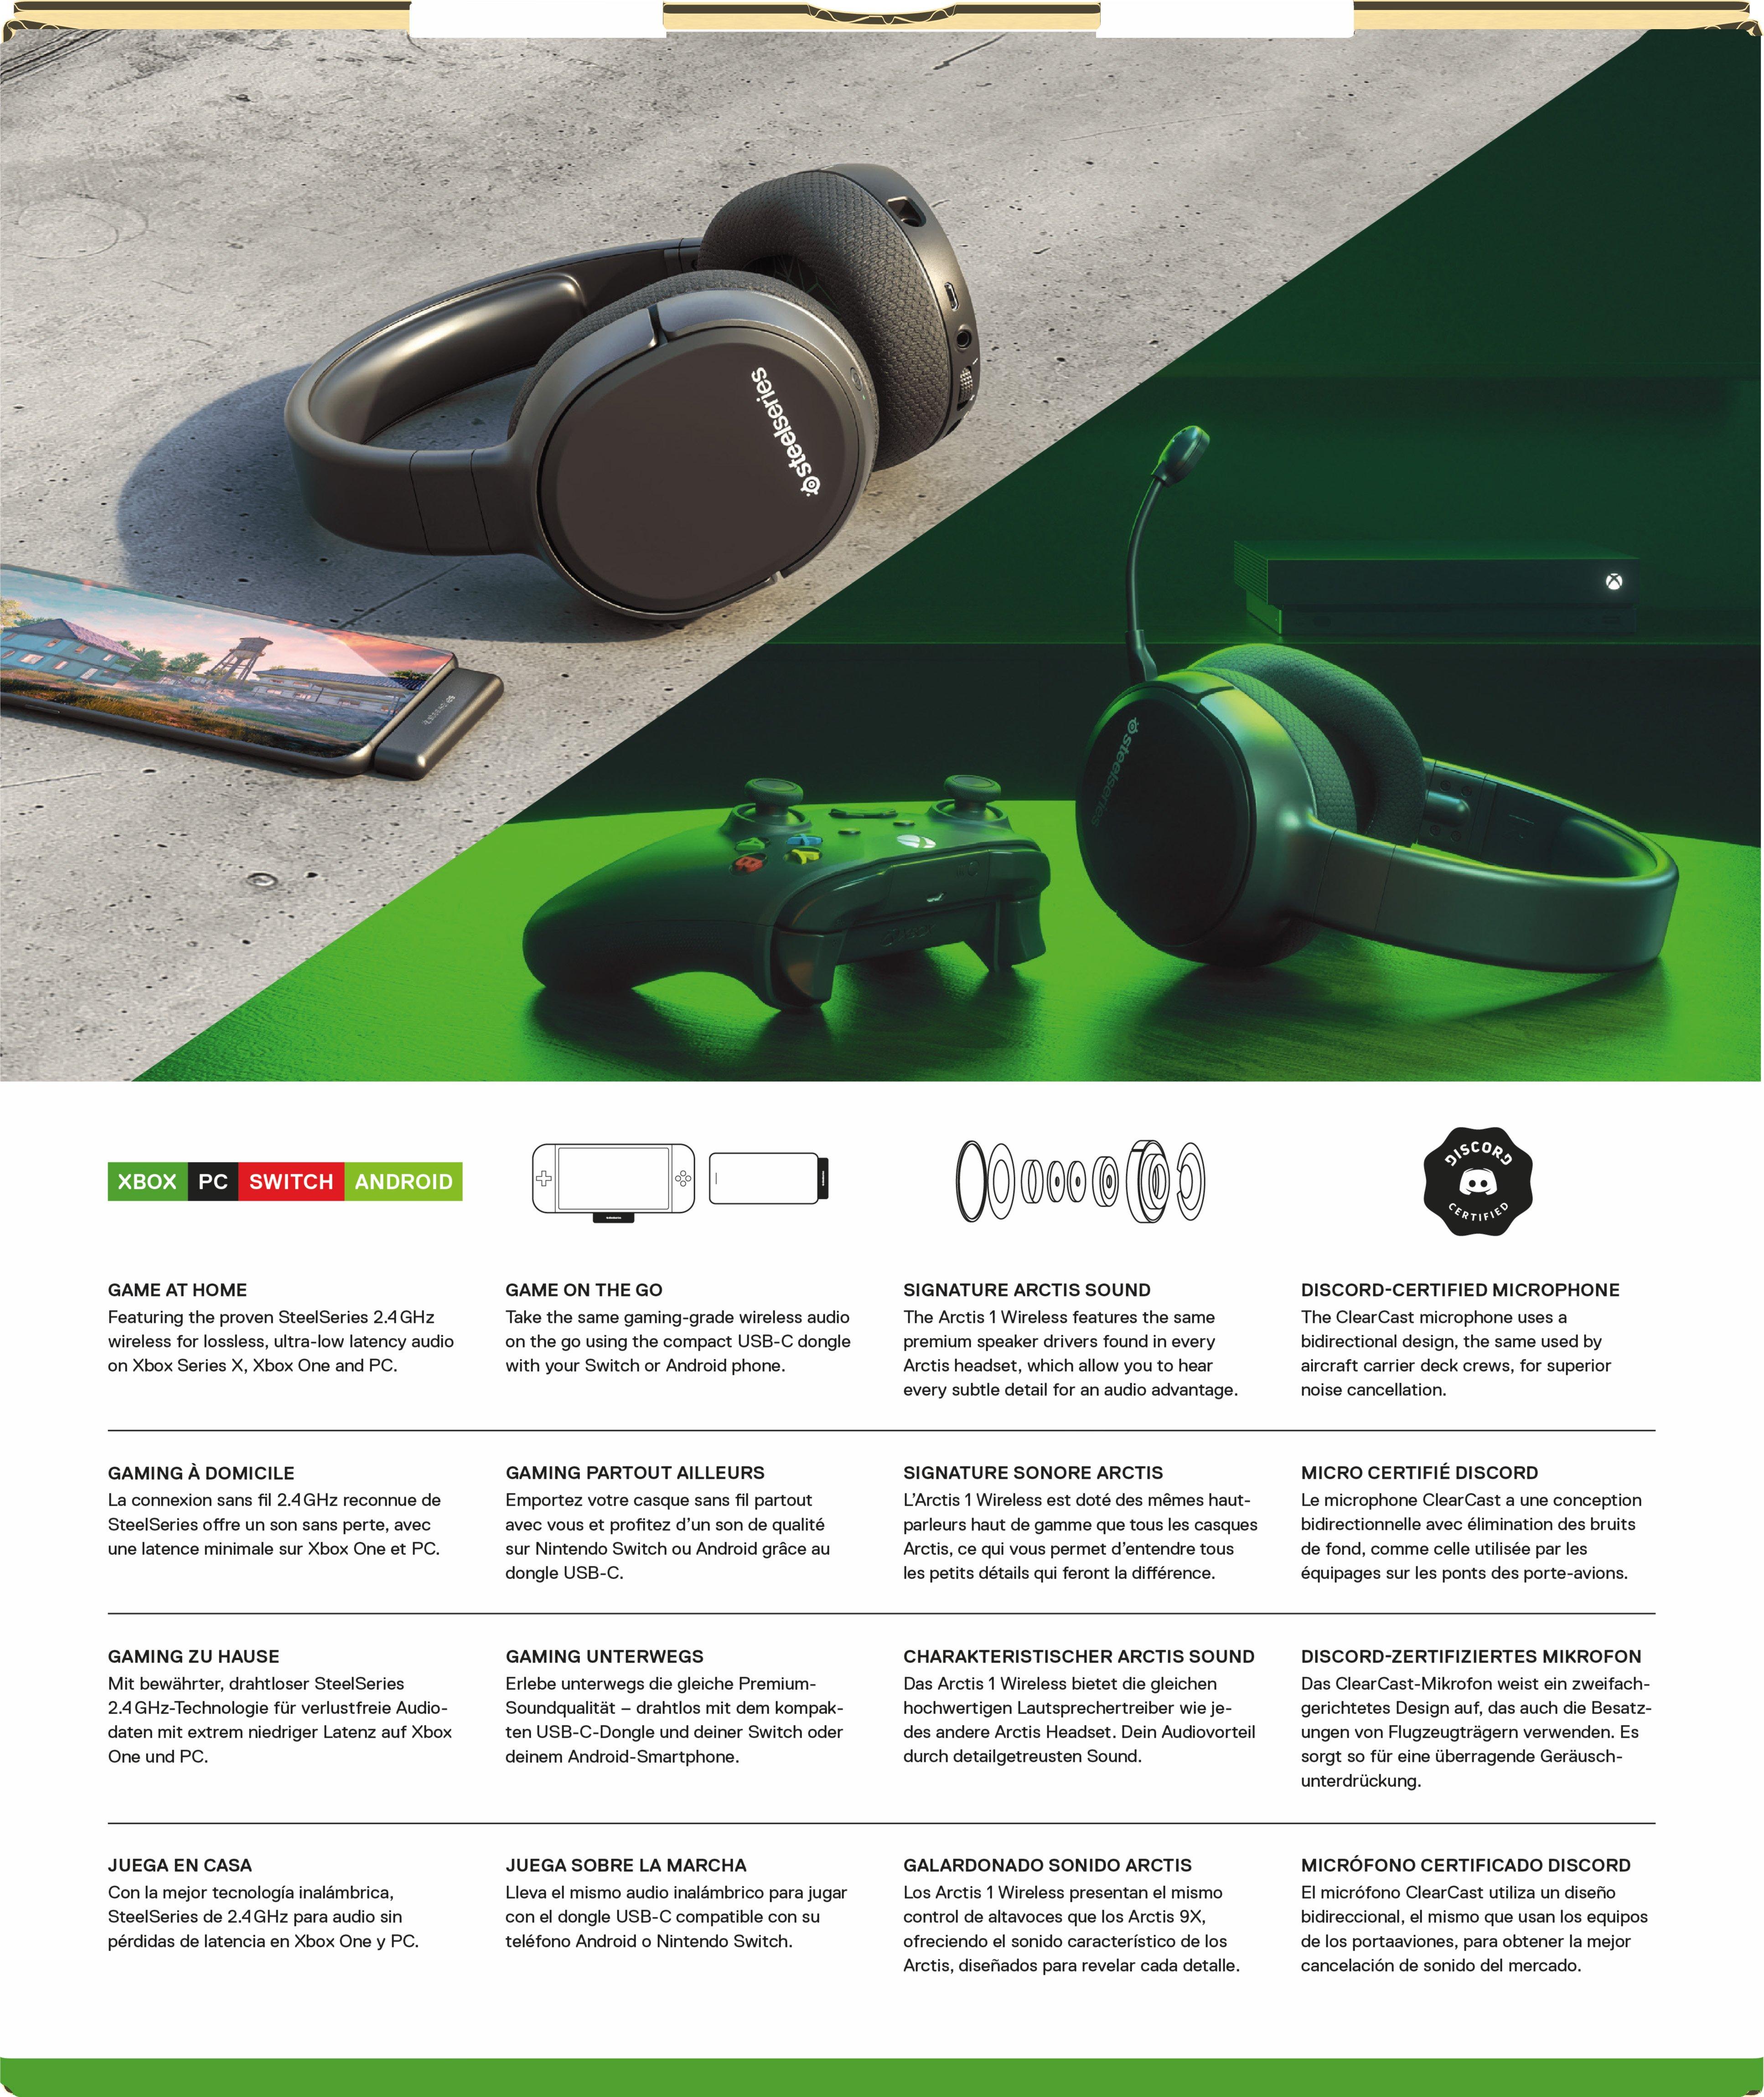 Arctis 1 Wireless Gaming Headset For Xbox One Xbox One Gamestop